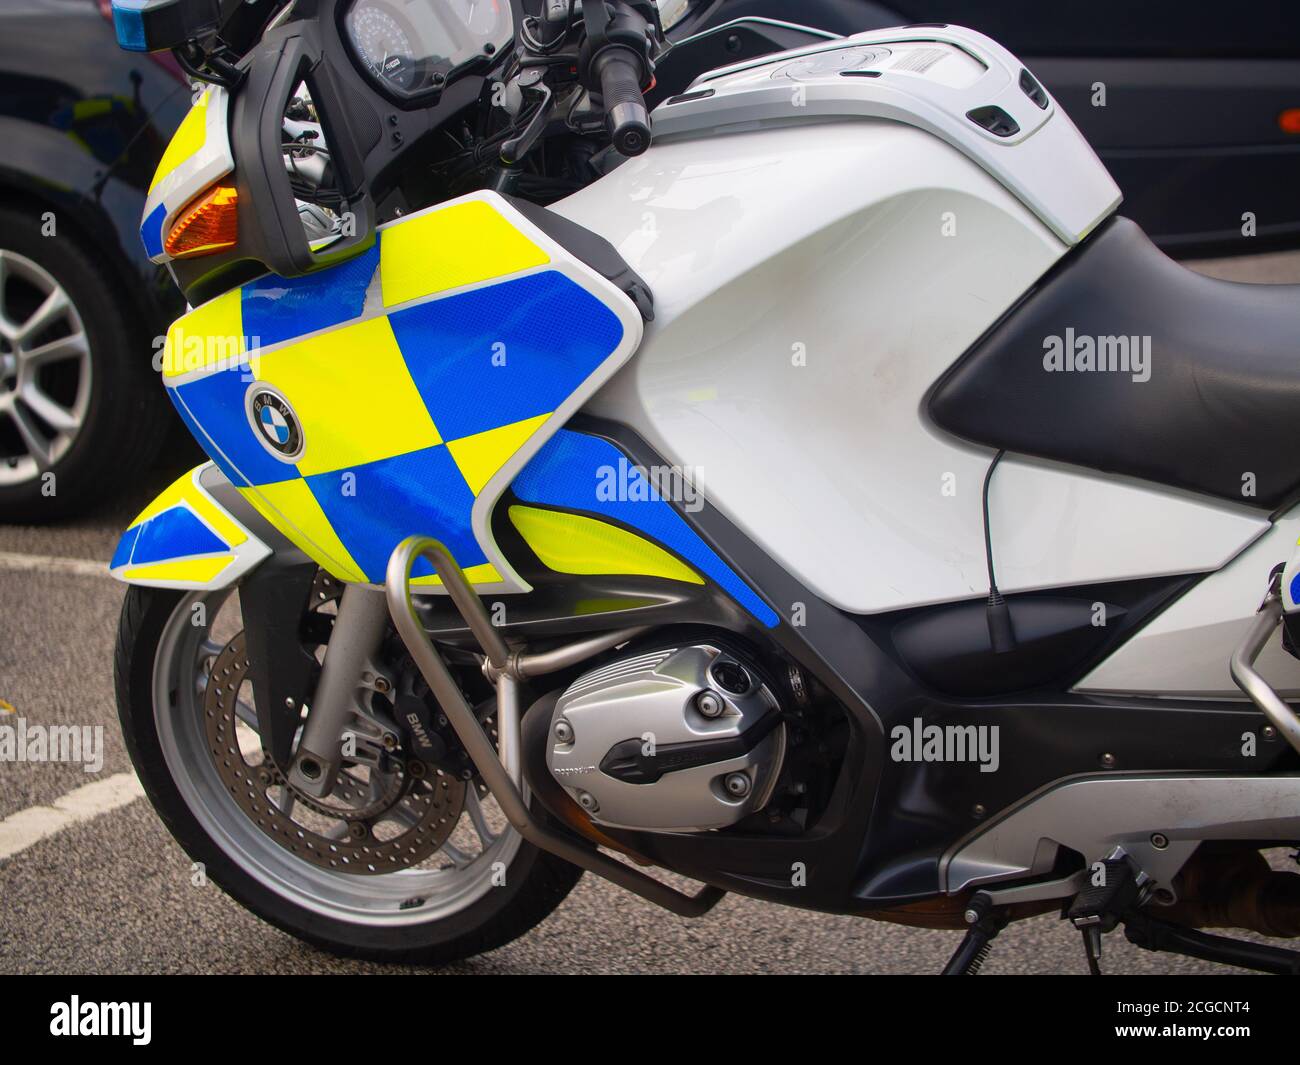 Police motorcycles parked together. Stock Photo